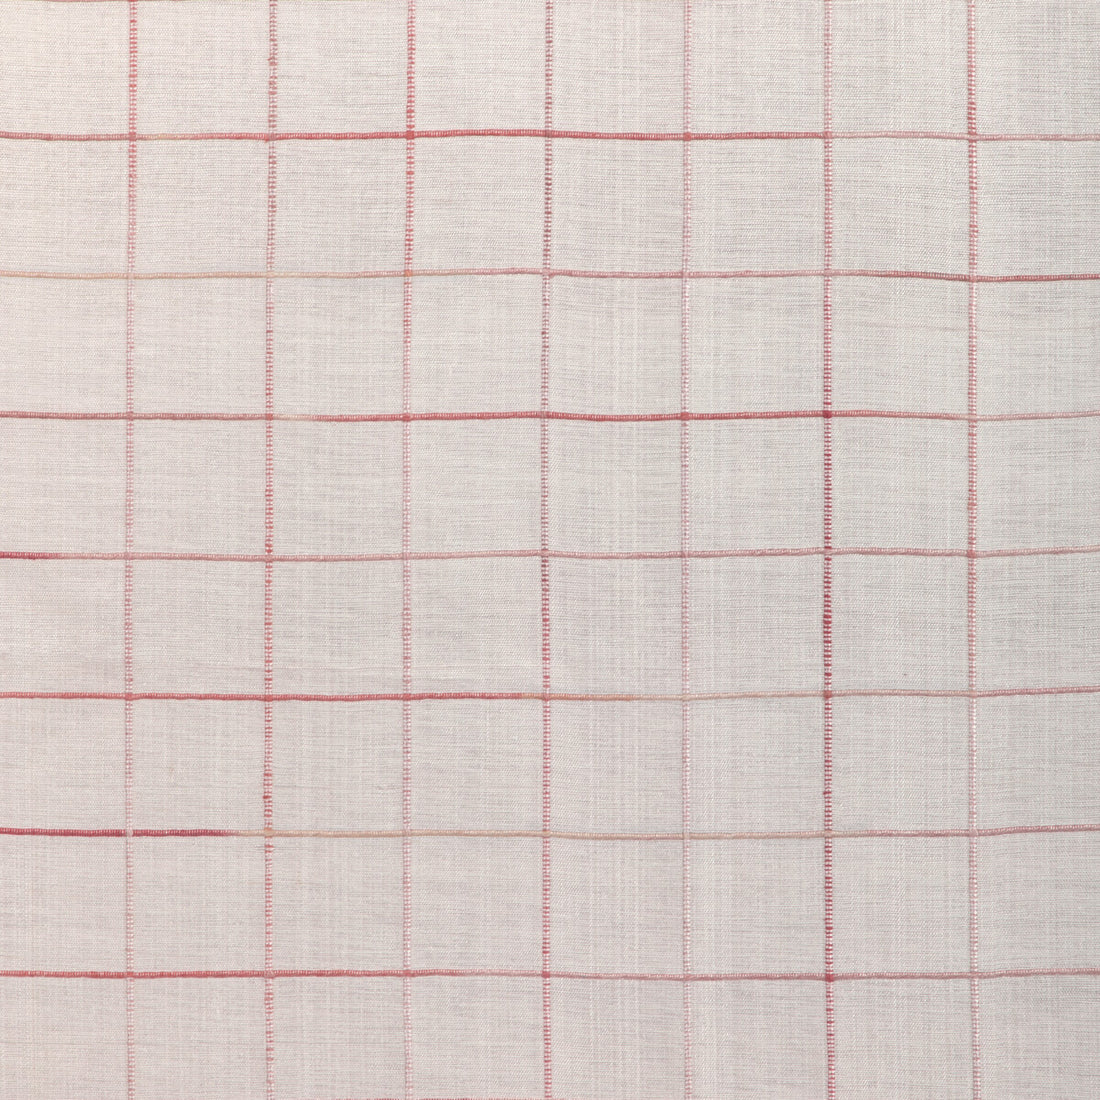 Moulin Check fabric in rose color - pattern 8023149.917.0 - by Brunschwig &amp; Fils in the Vienne Silks collection